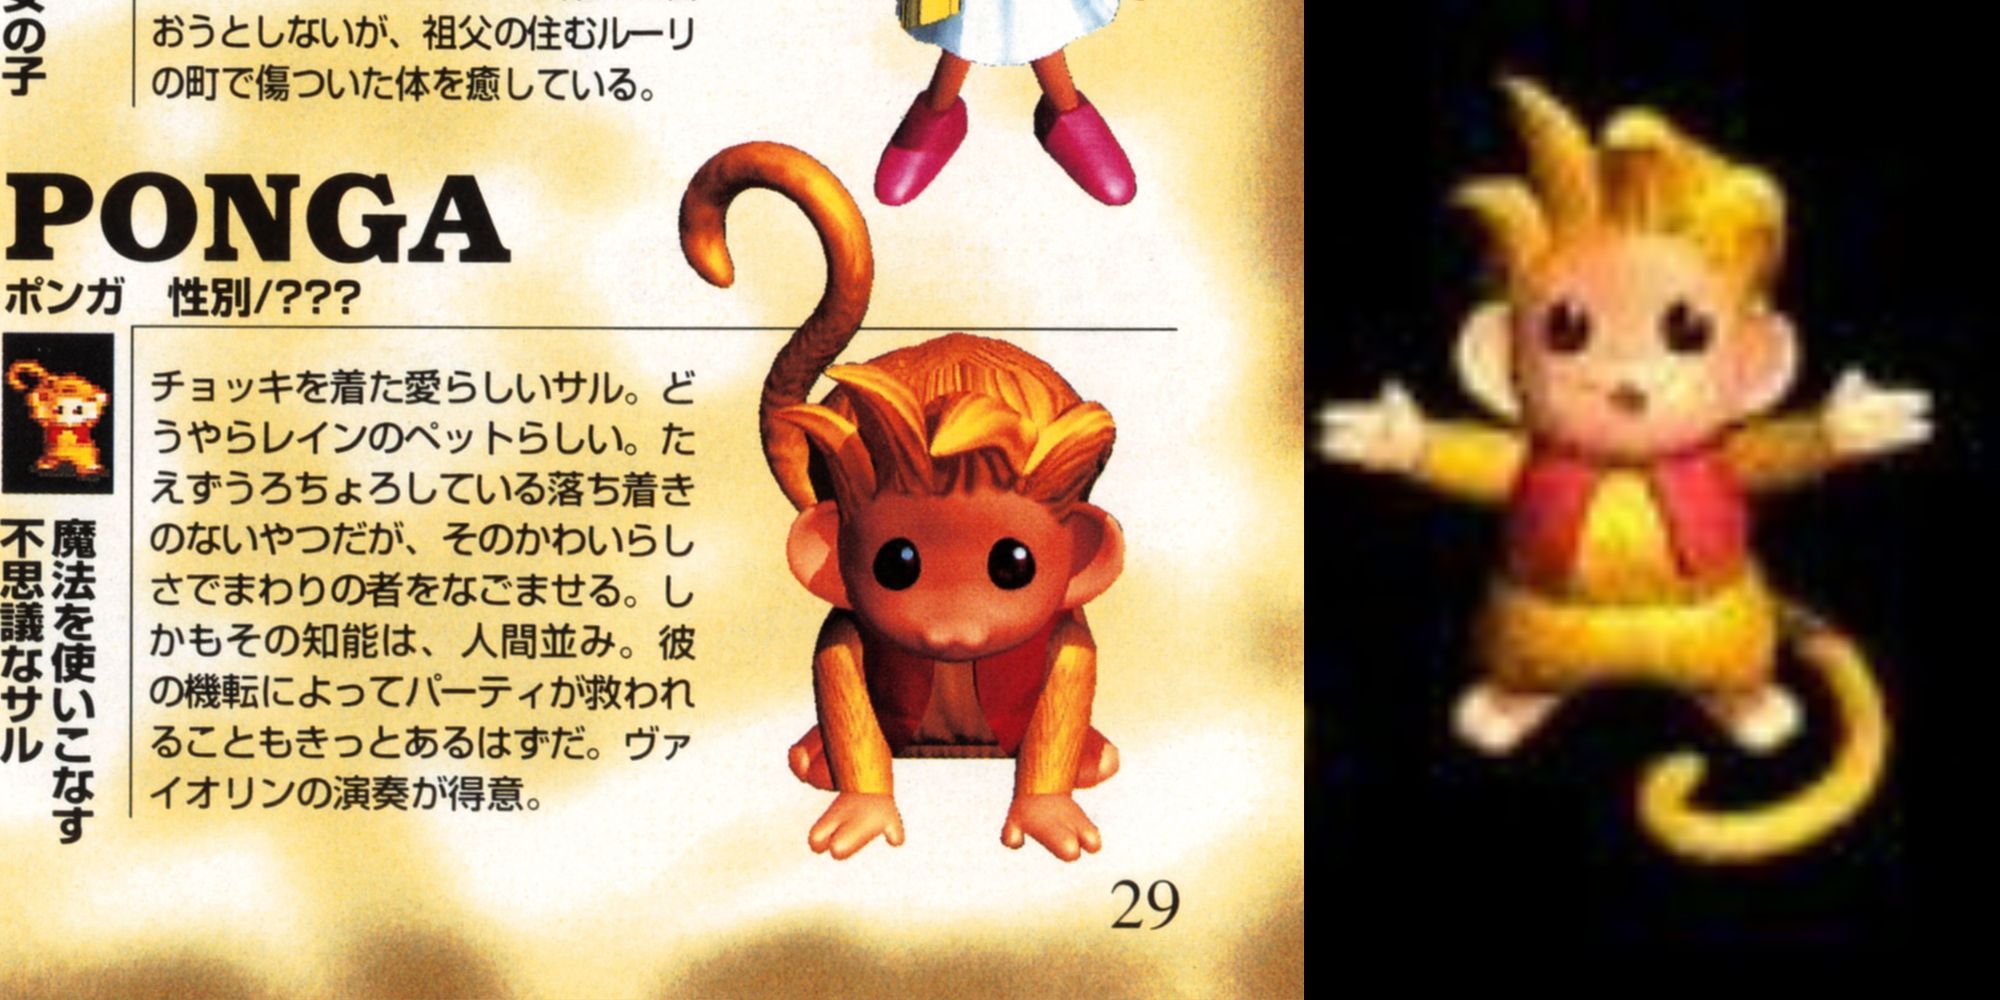 Ponga the Monkey with arms open wide like a hug and with lots of Japanese kanji from the guide